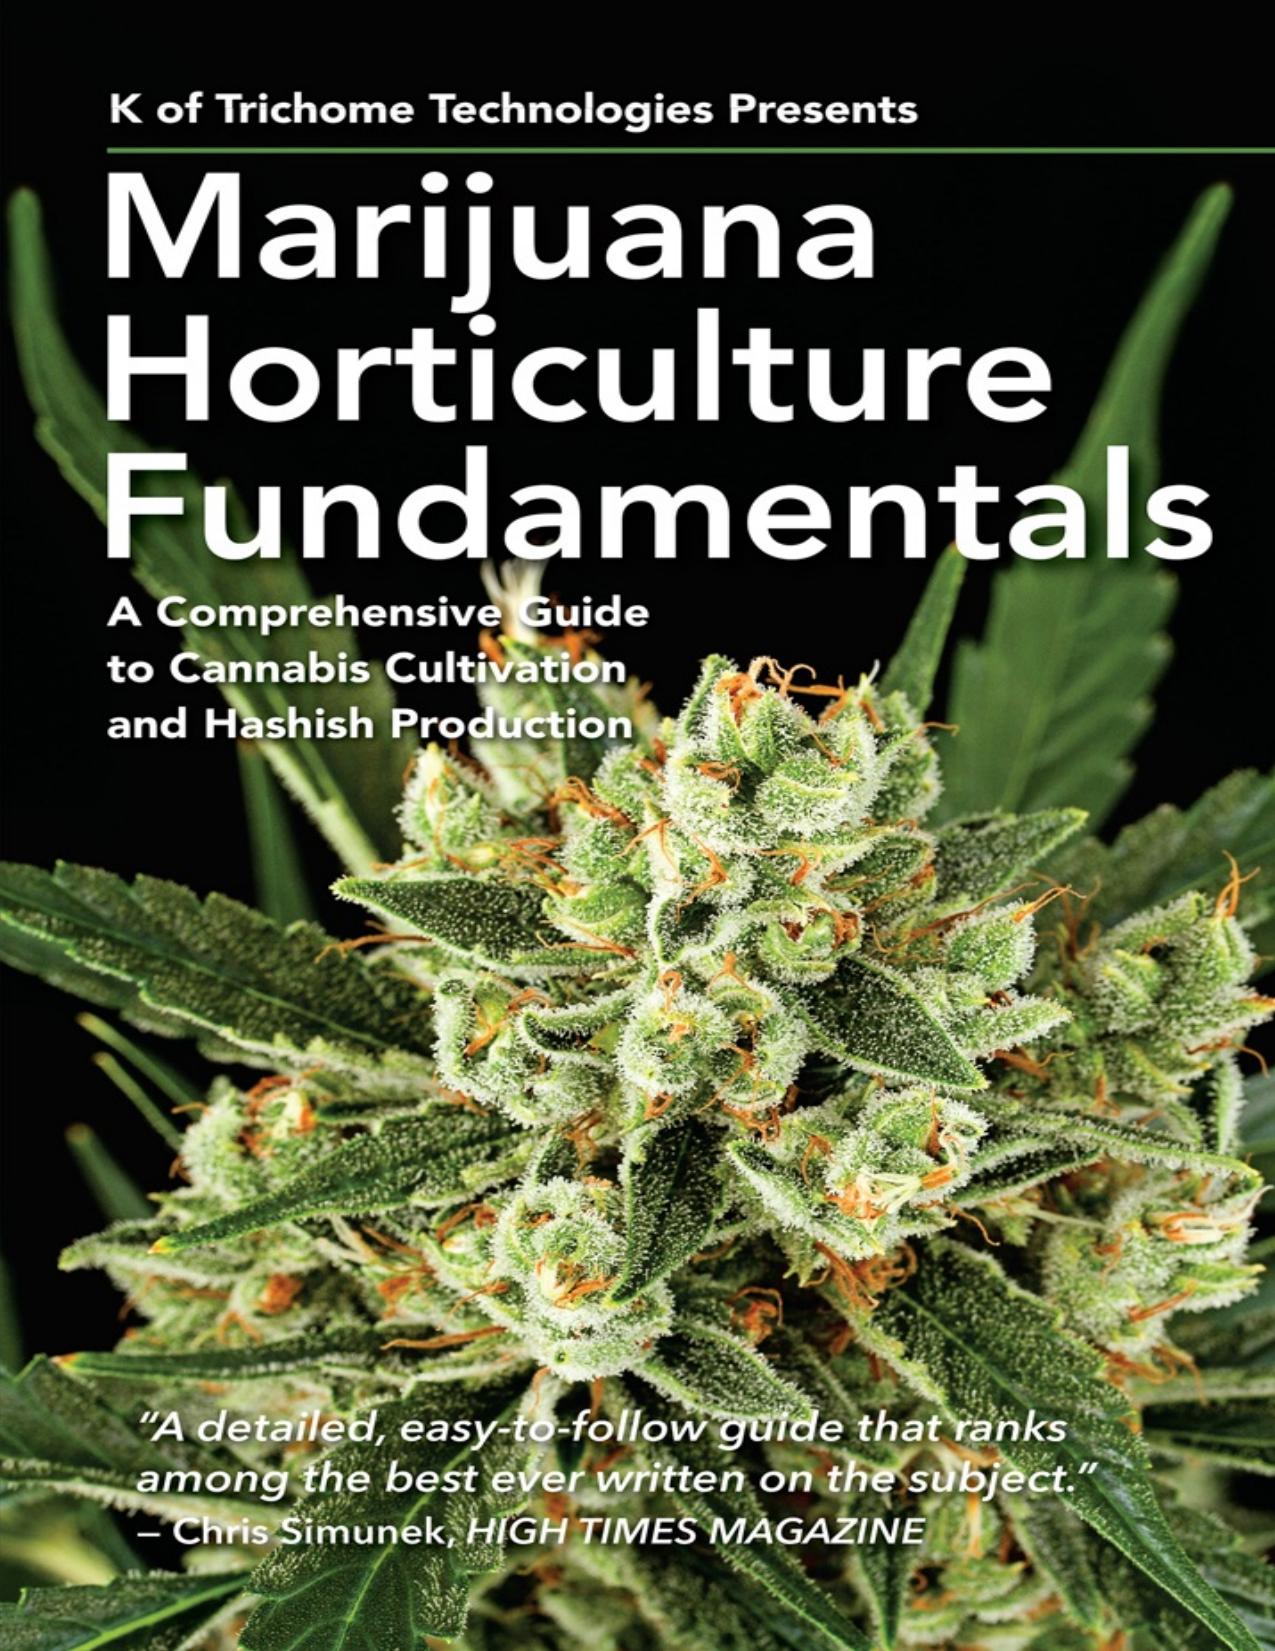 Marijuana Horticulture Fundamentals: A Comprehensive Guide to Cannabis Cultivation and Hashish Production - PDFDrive.com